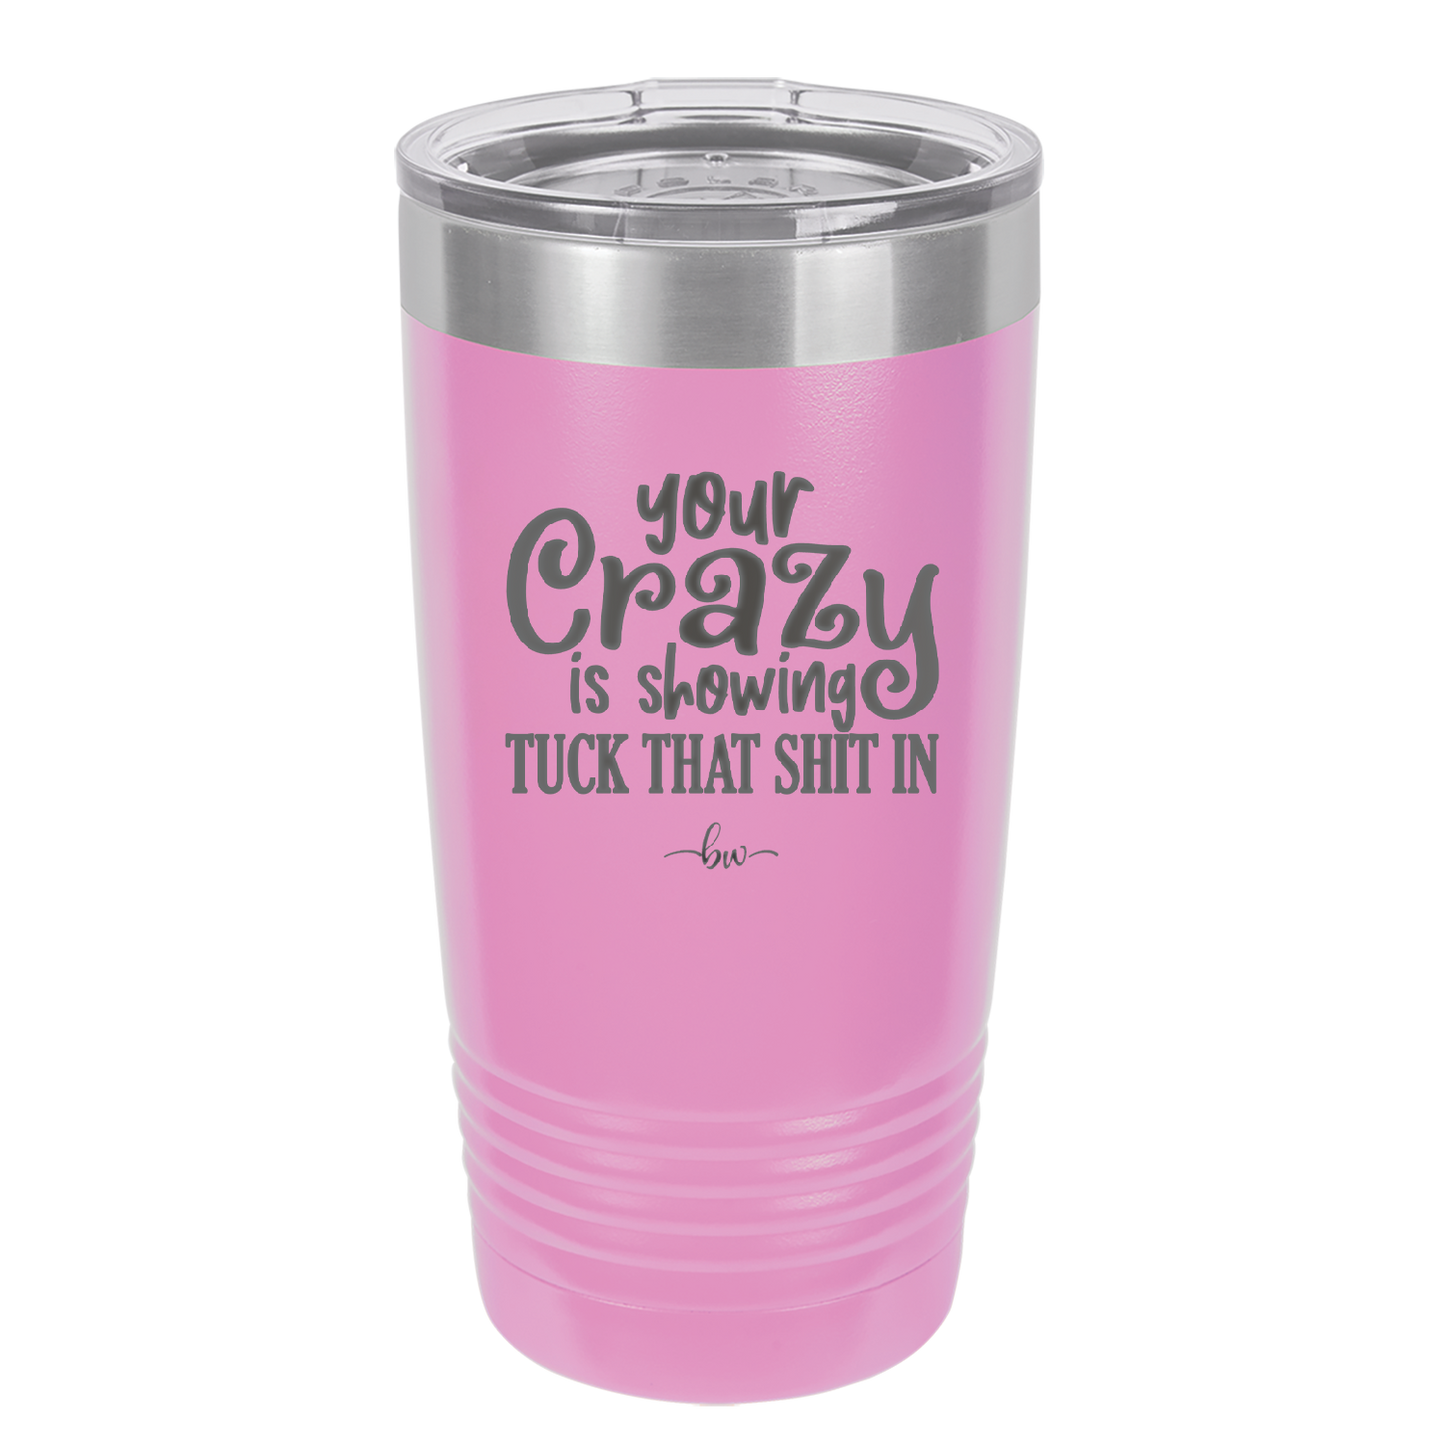 Your Crazy is Showing Tuck That Shit in - Laser Engraved Stainless Steel Drinkware - 2226 -